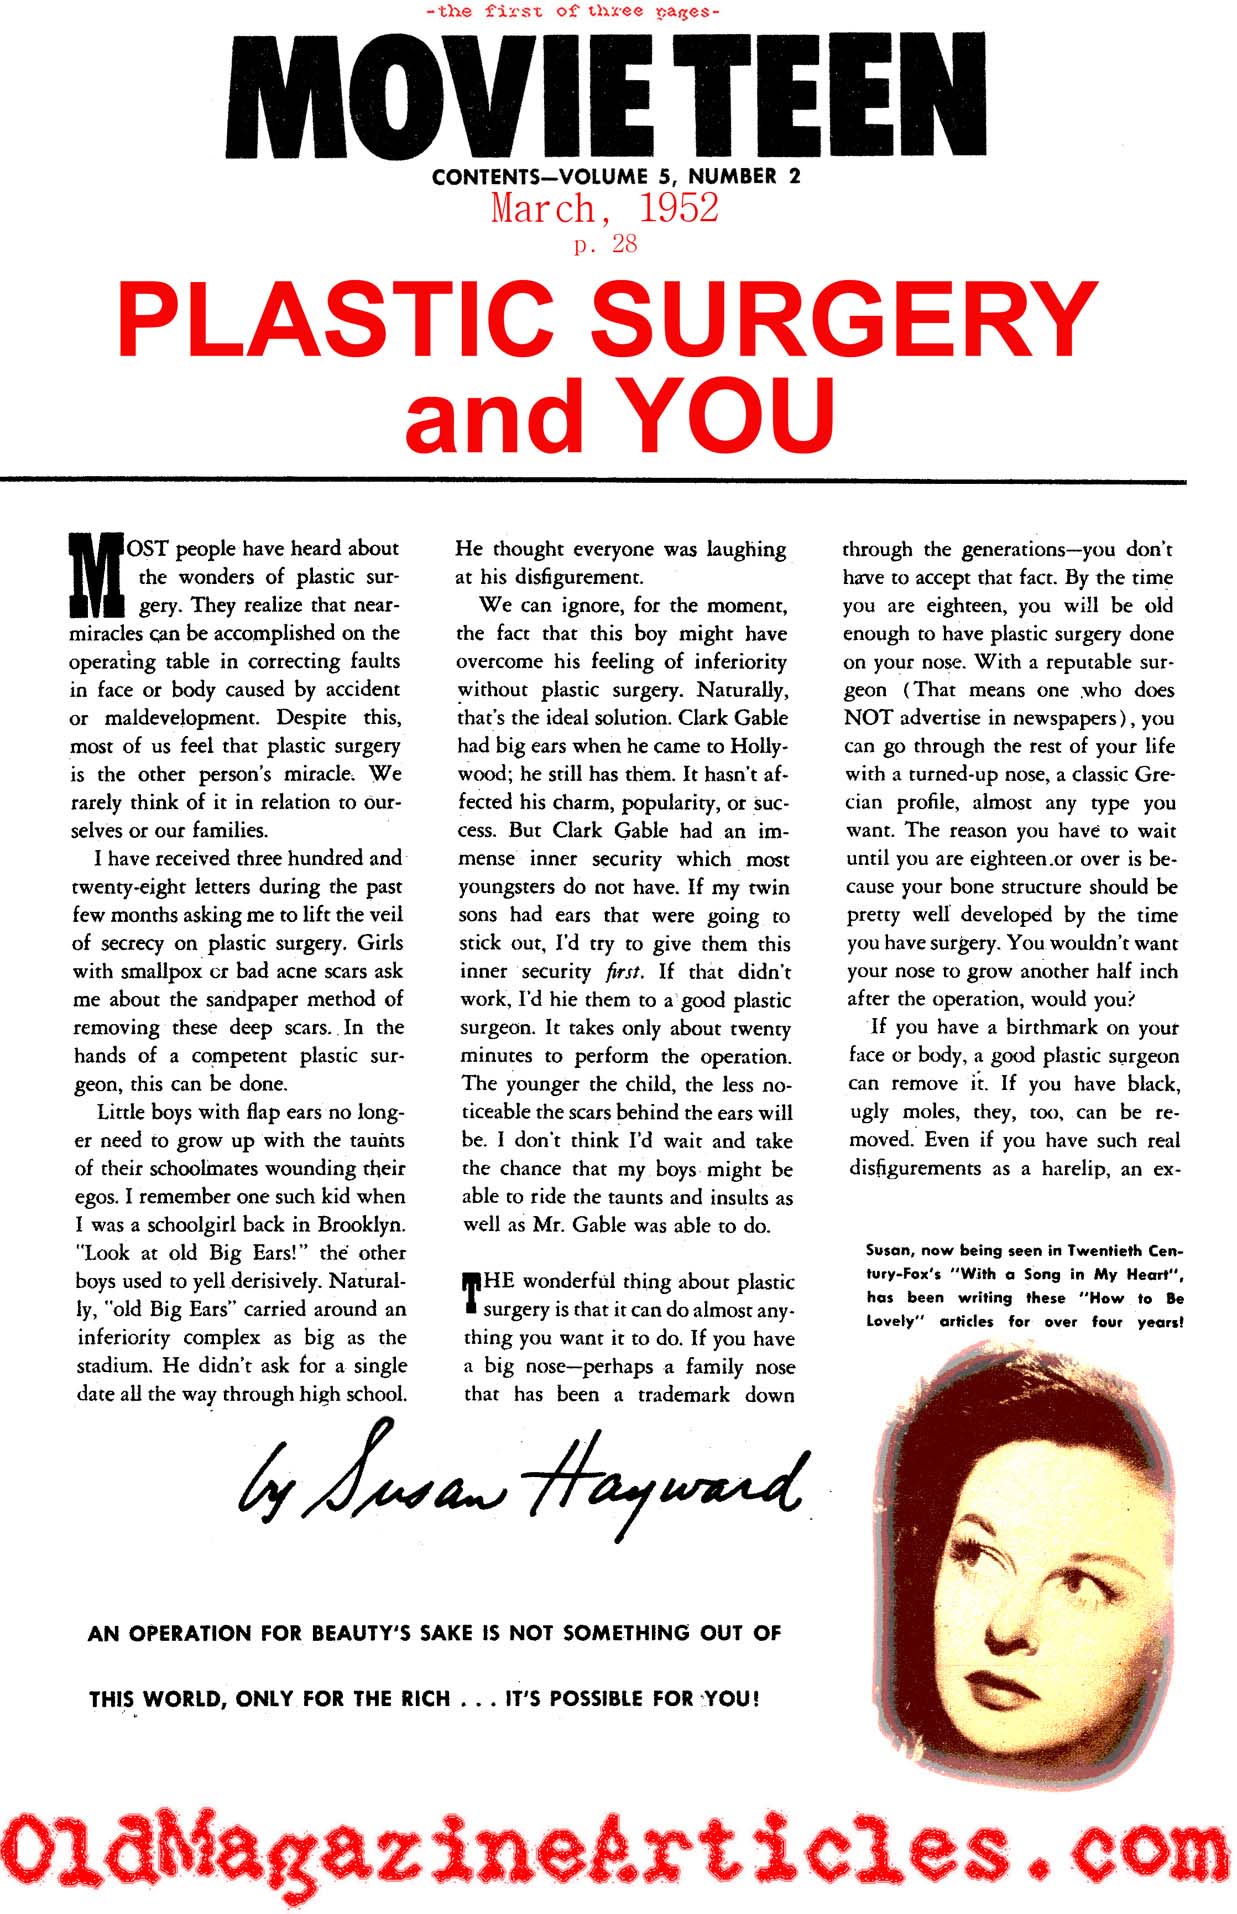 Plastic Surgery and You (Movie Teen Magazine, 1952)